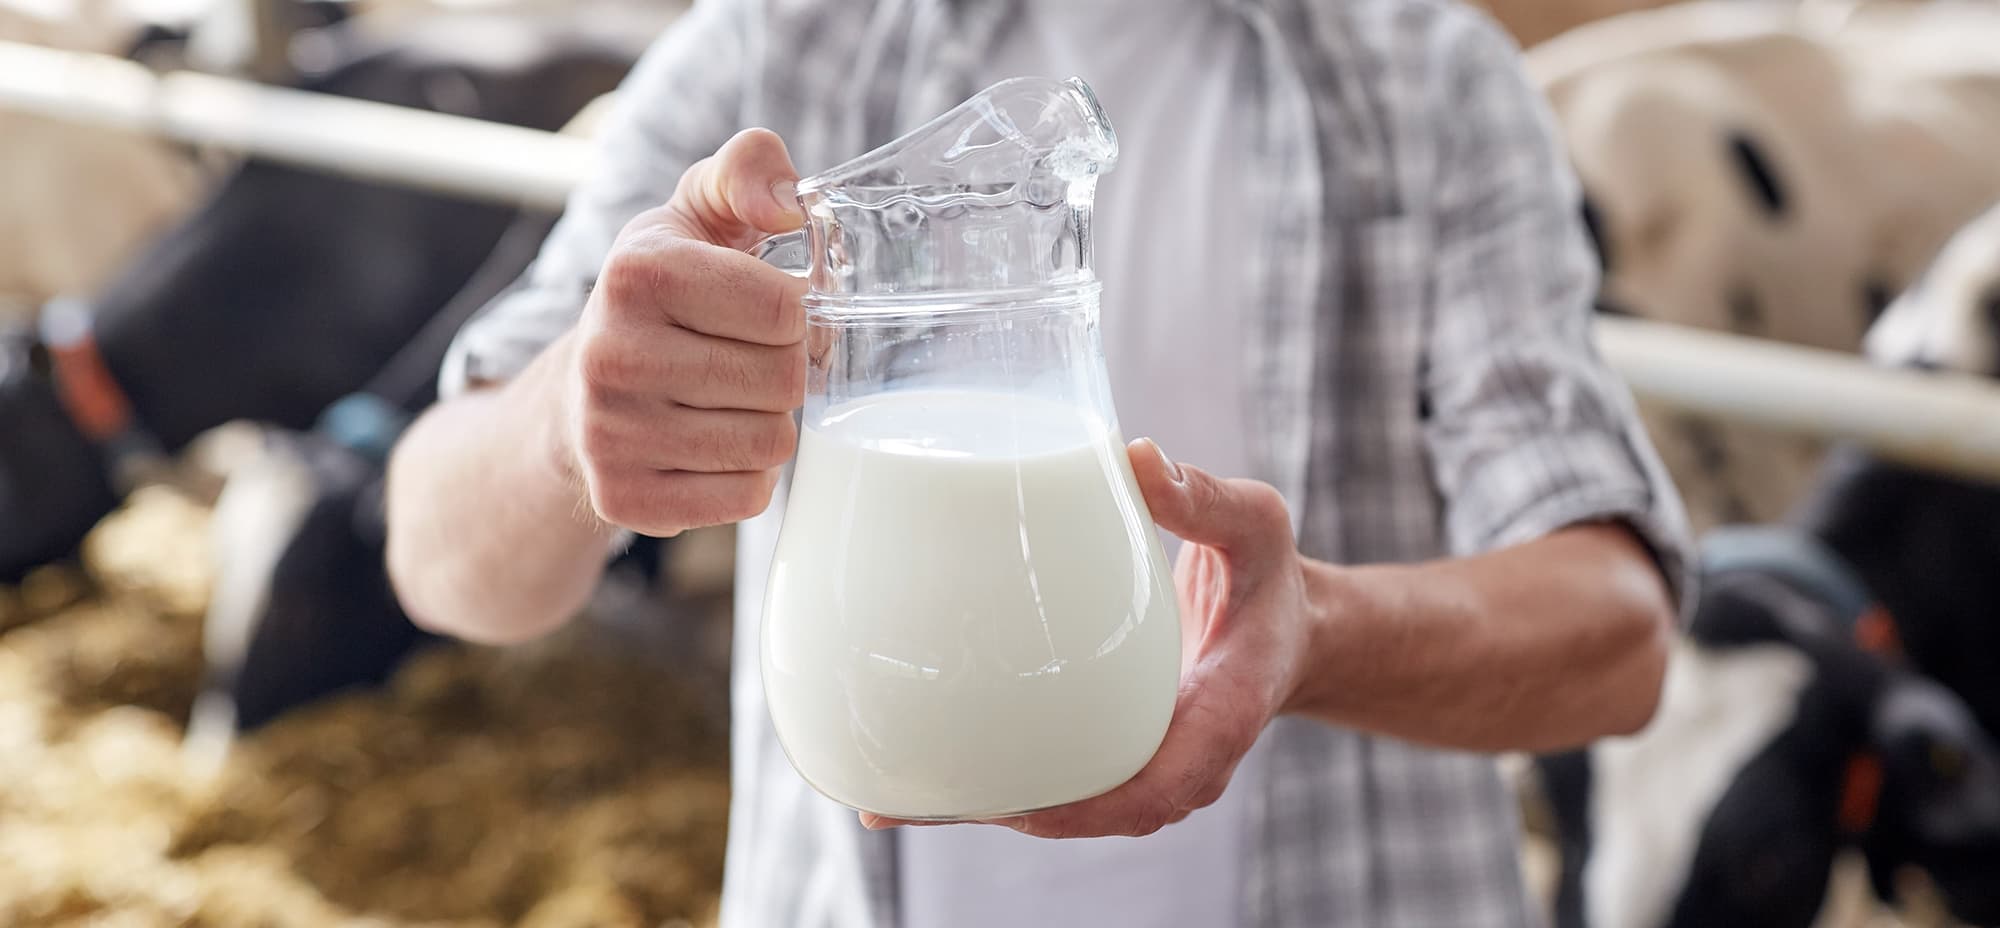 Man holding a jug of cow's milk